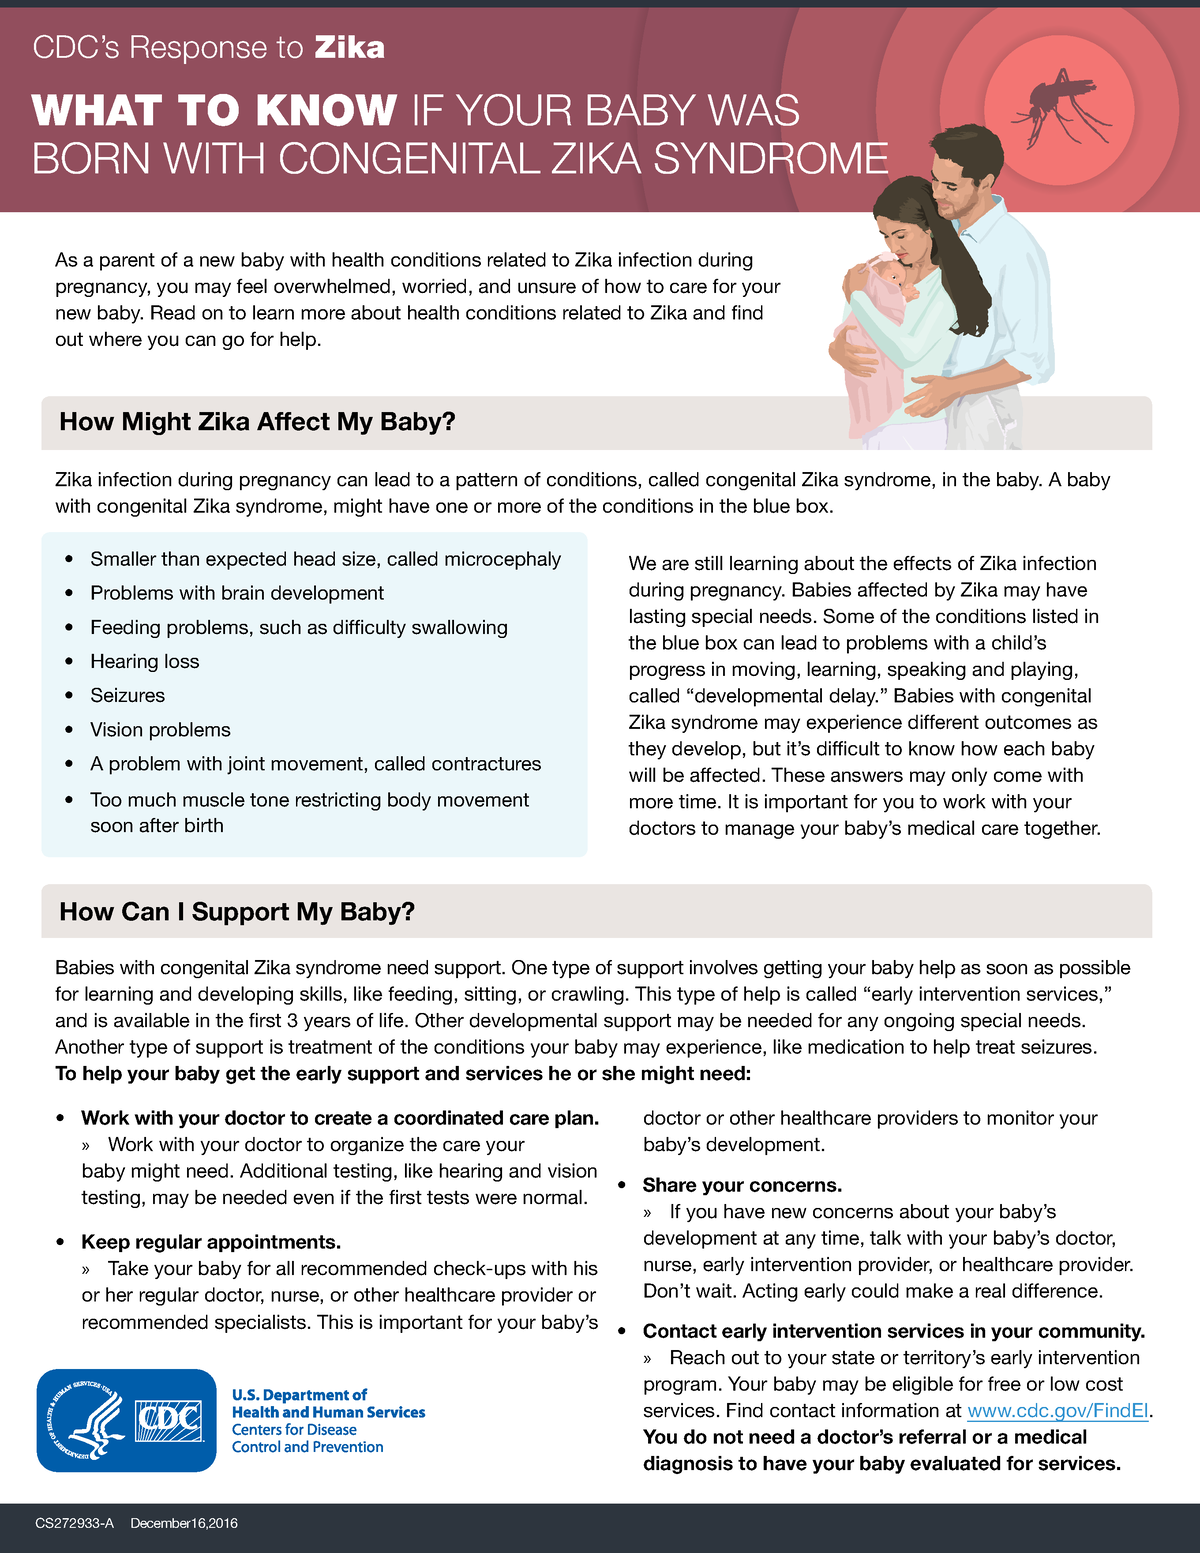 CDC - What to know if your baby was born with Congenital Zika Syndrome ...